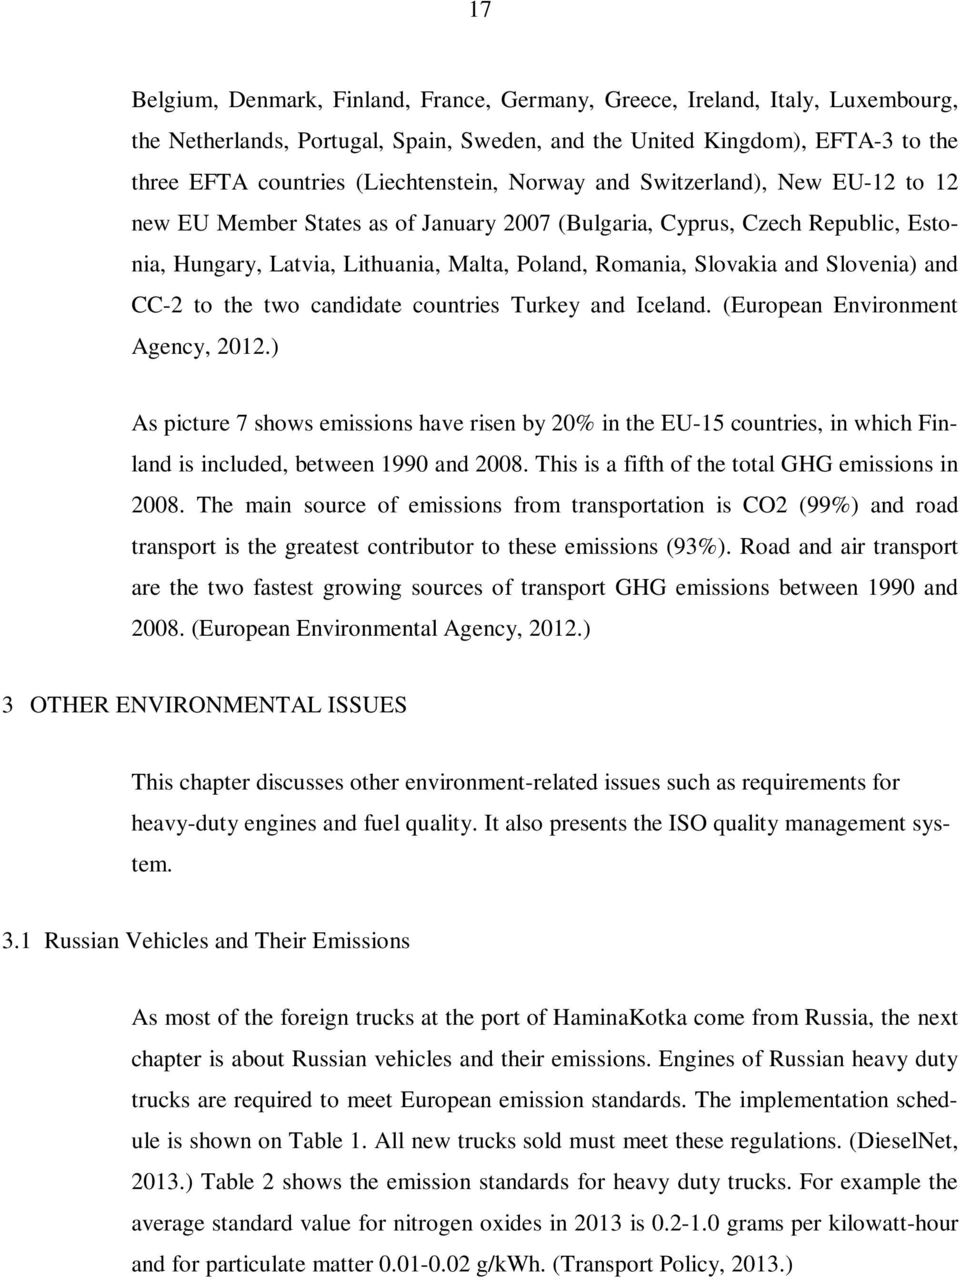 Slovakia and Slovenia) and CC-2 to the two candidate countries Turkey and Iceland. (European Environment Agency, 2012.